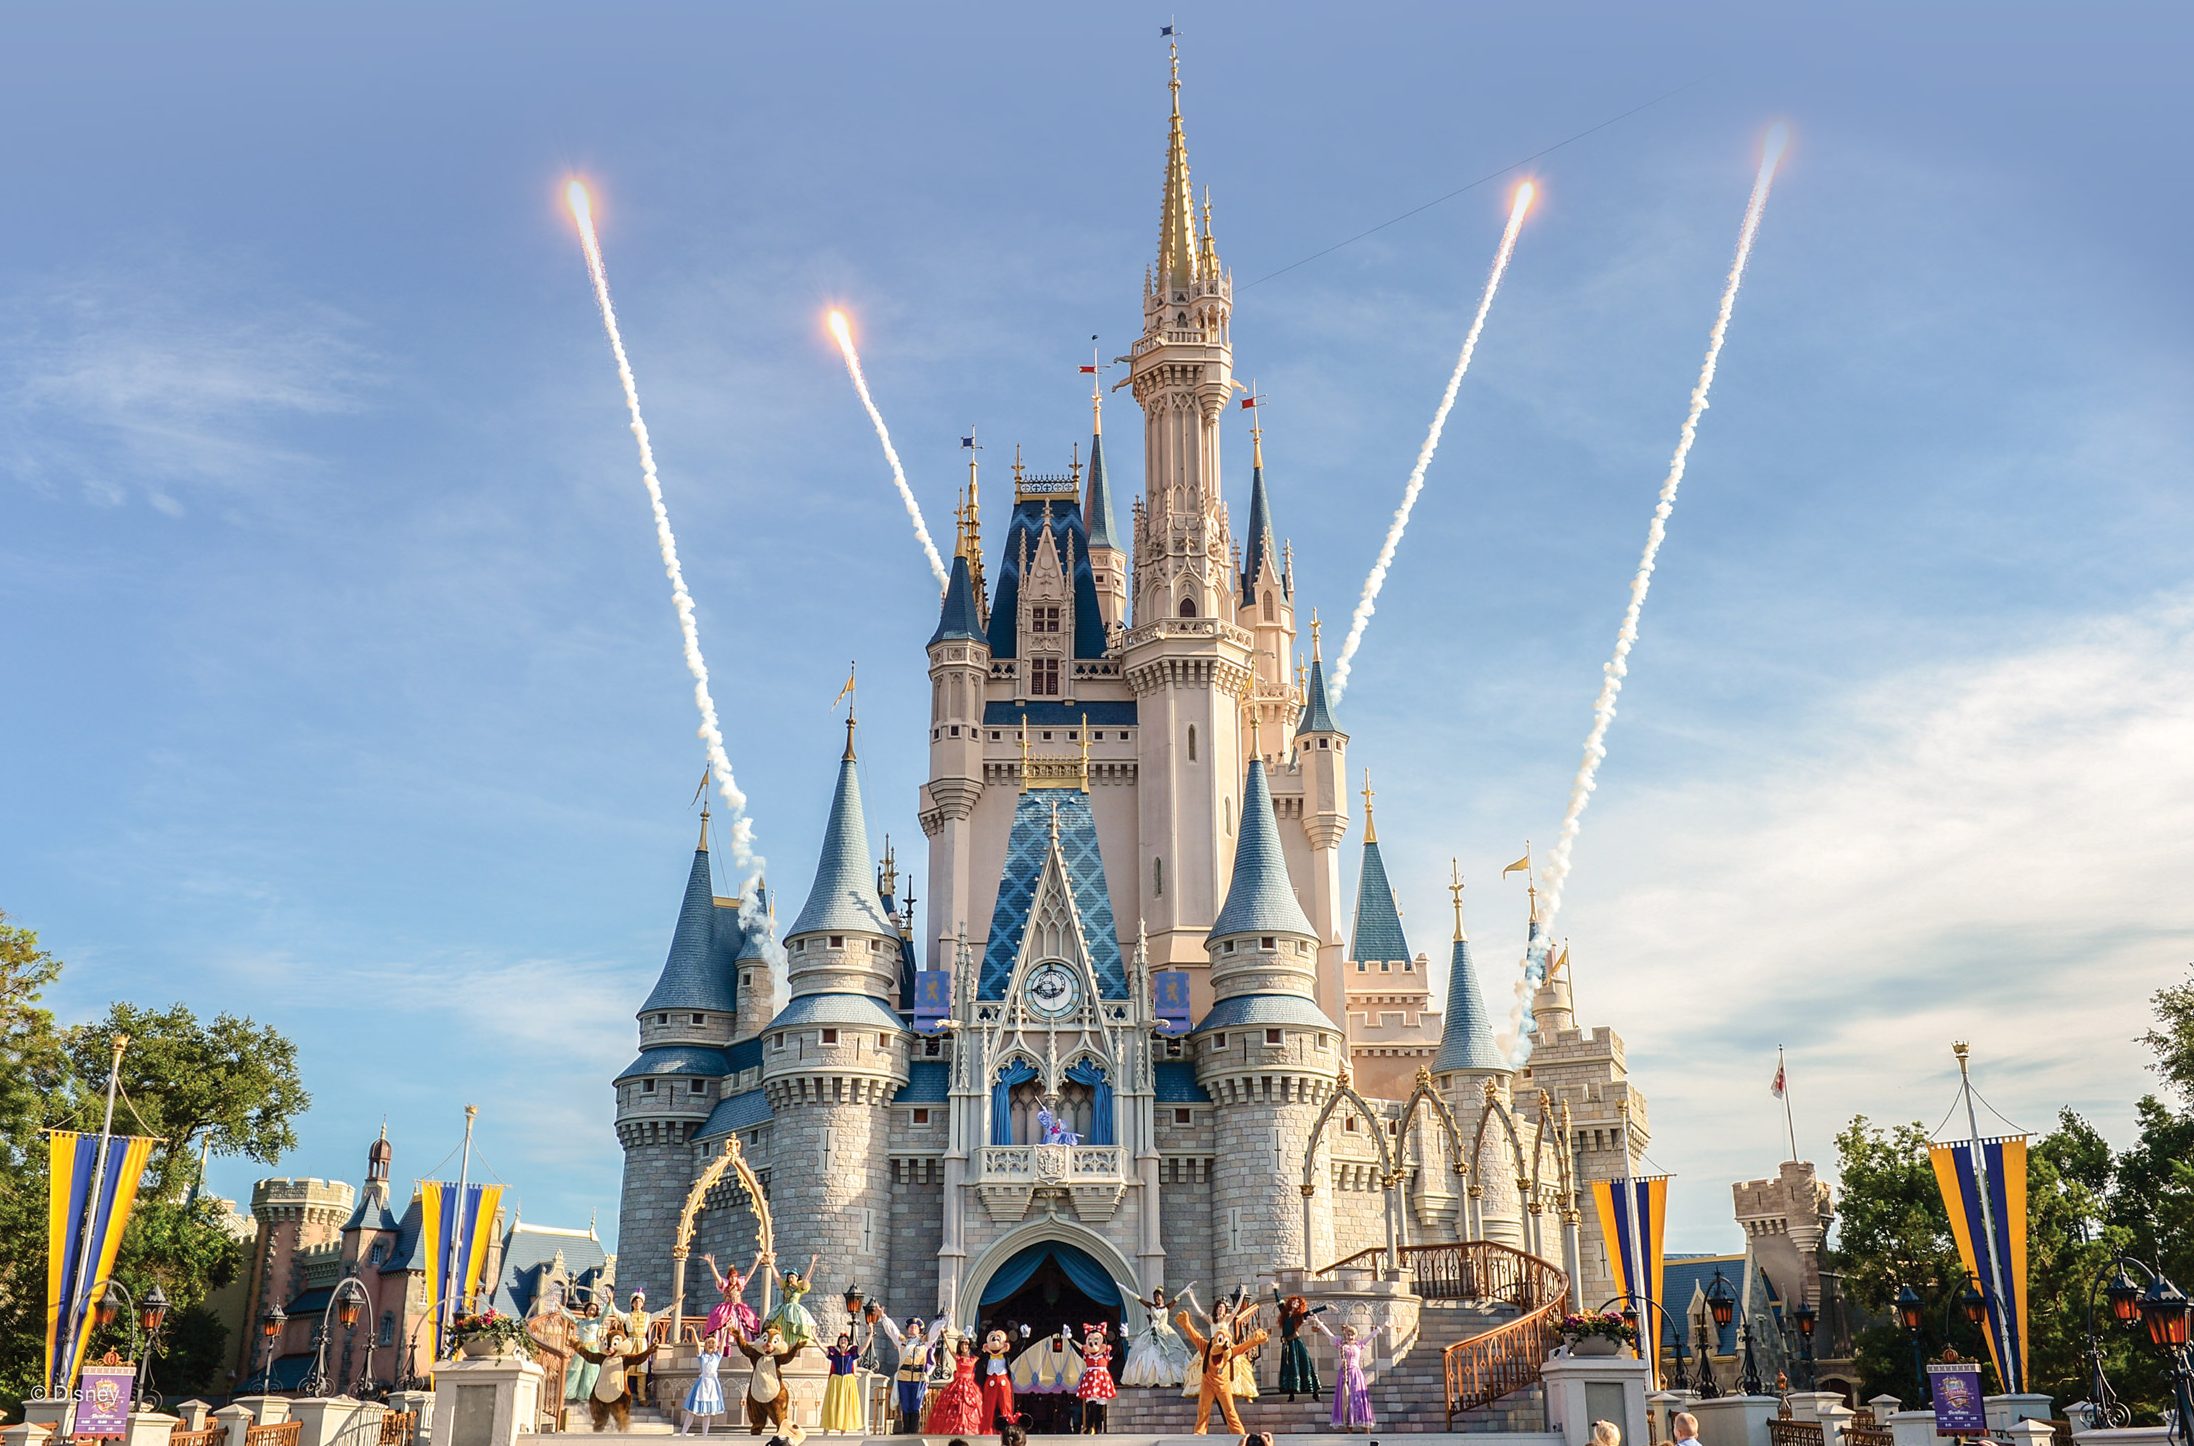 Win a Disney Vacation with this Cuties Promotion!